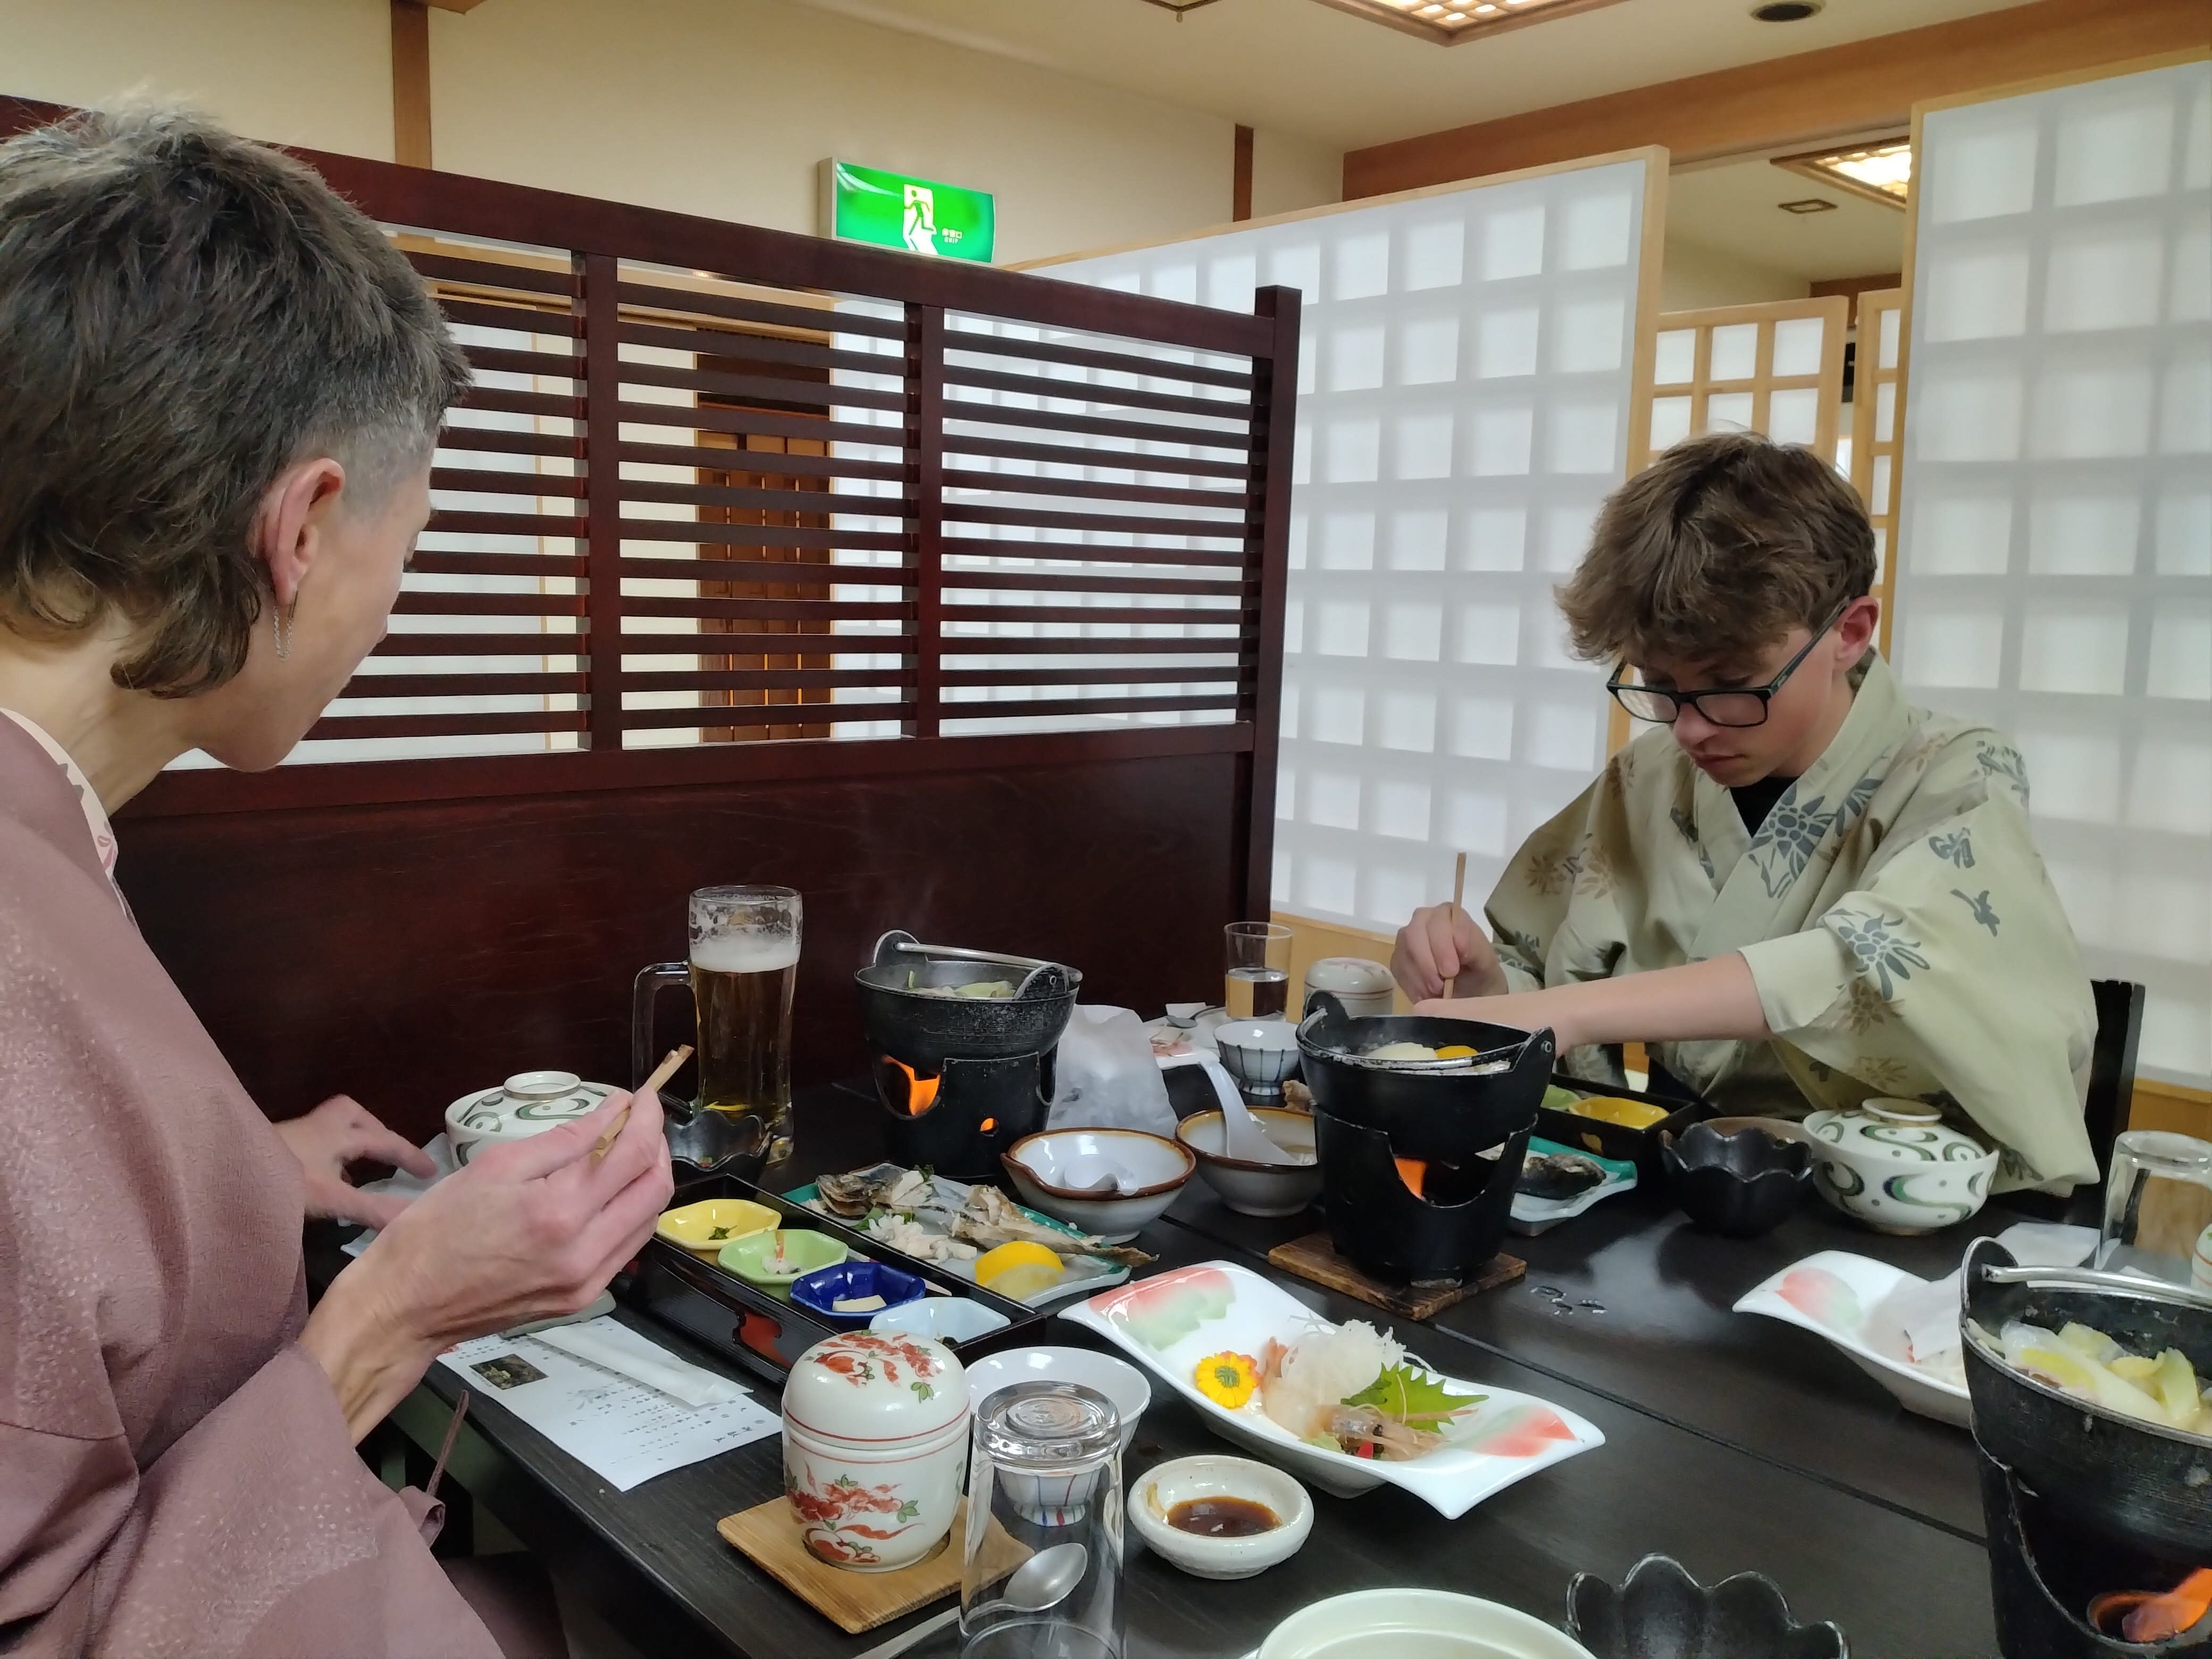 A mother and son enjoy traditional Japanese cuisine while dressed in yukata.